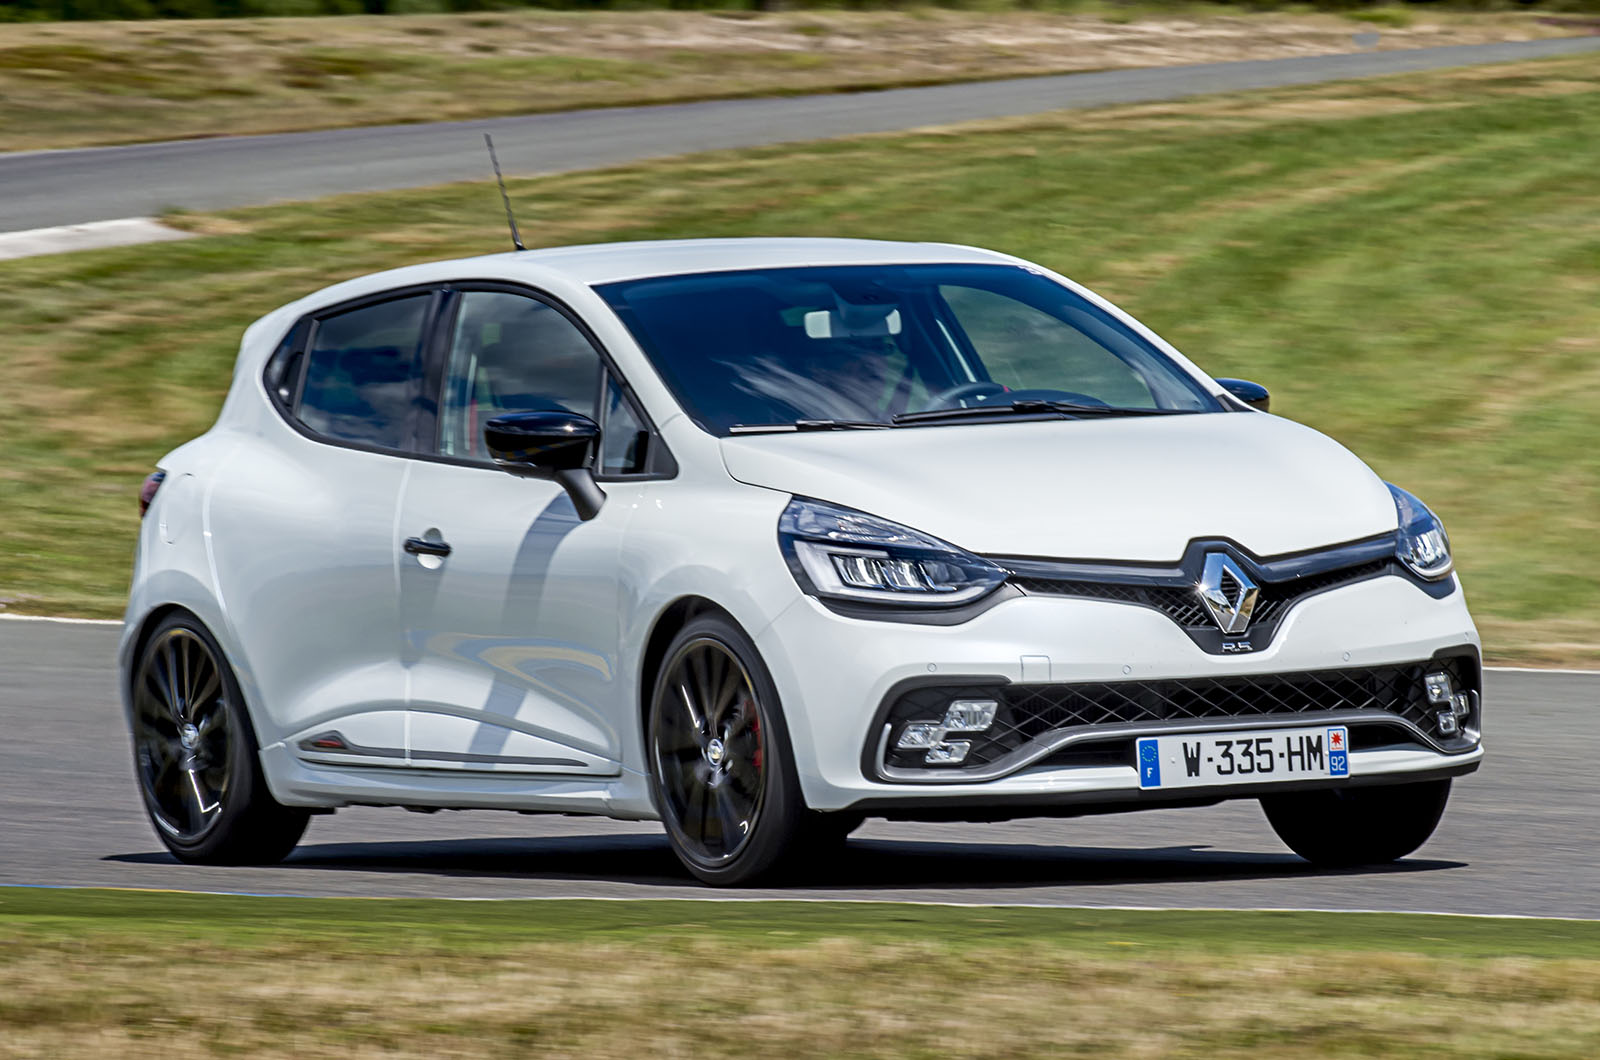 haar Exclusief Ringlet 2016 Renault Clio RS 220 Trophy first drive | Autocar